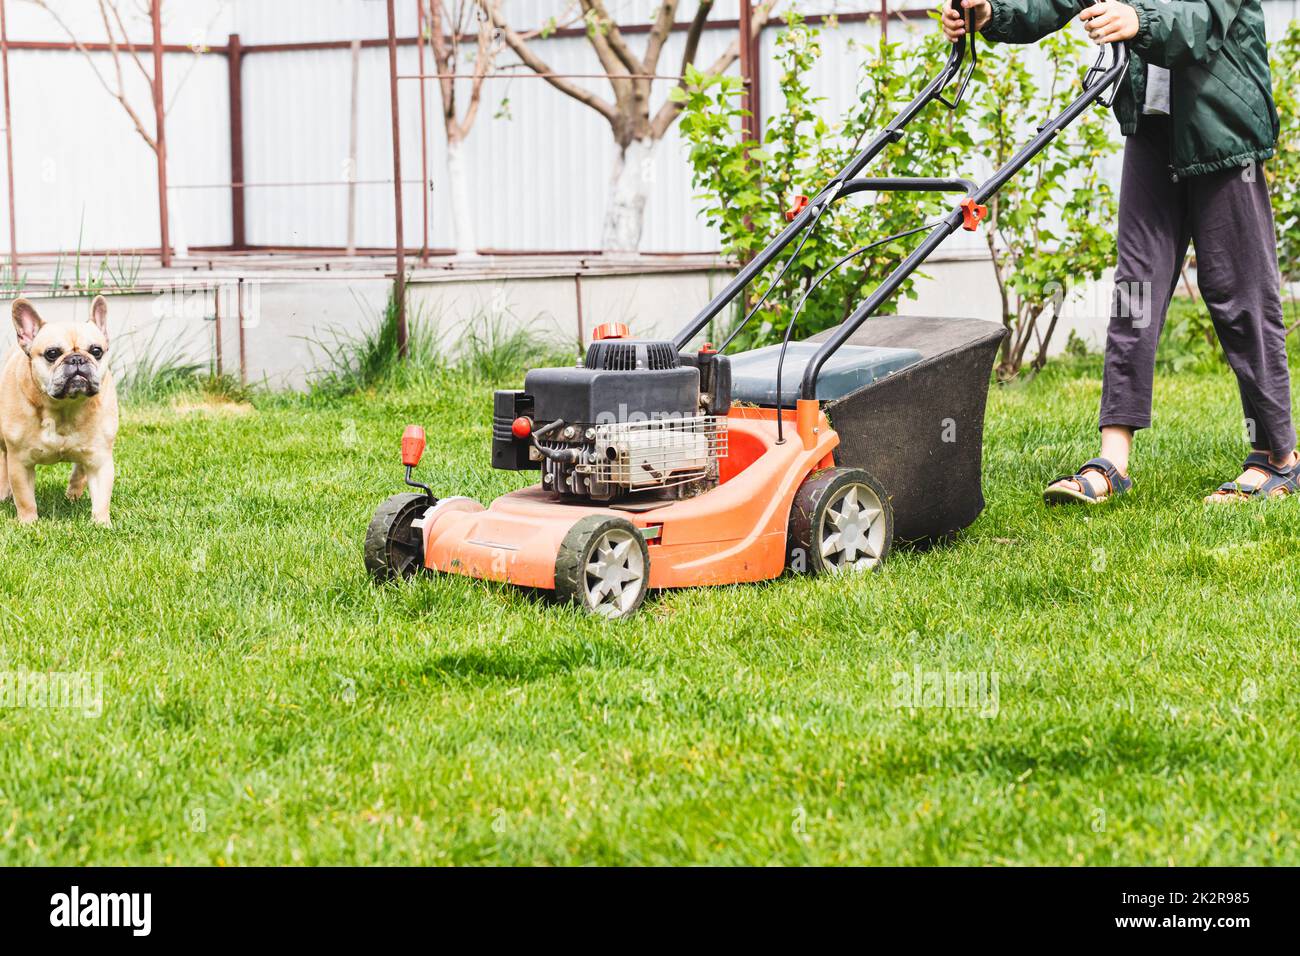 Lawn mover on green grass in sunny day. Lawn mover on green grass in modern garden. Machine for cutting lawns. Stock Photo